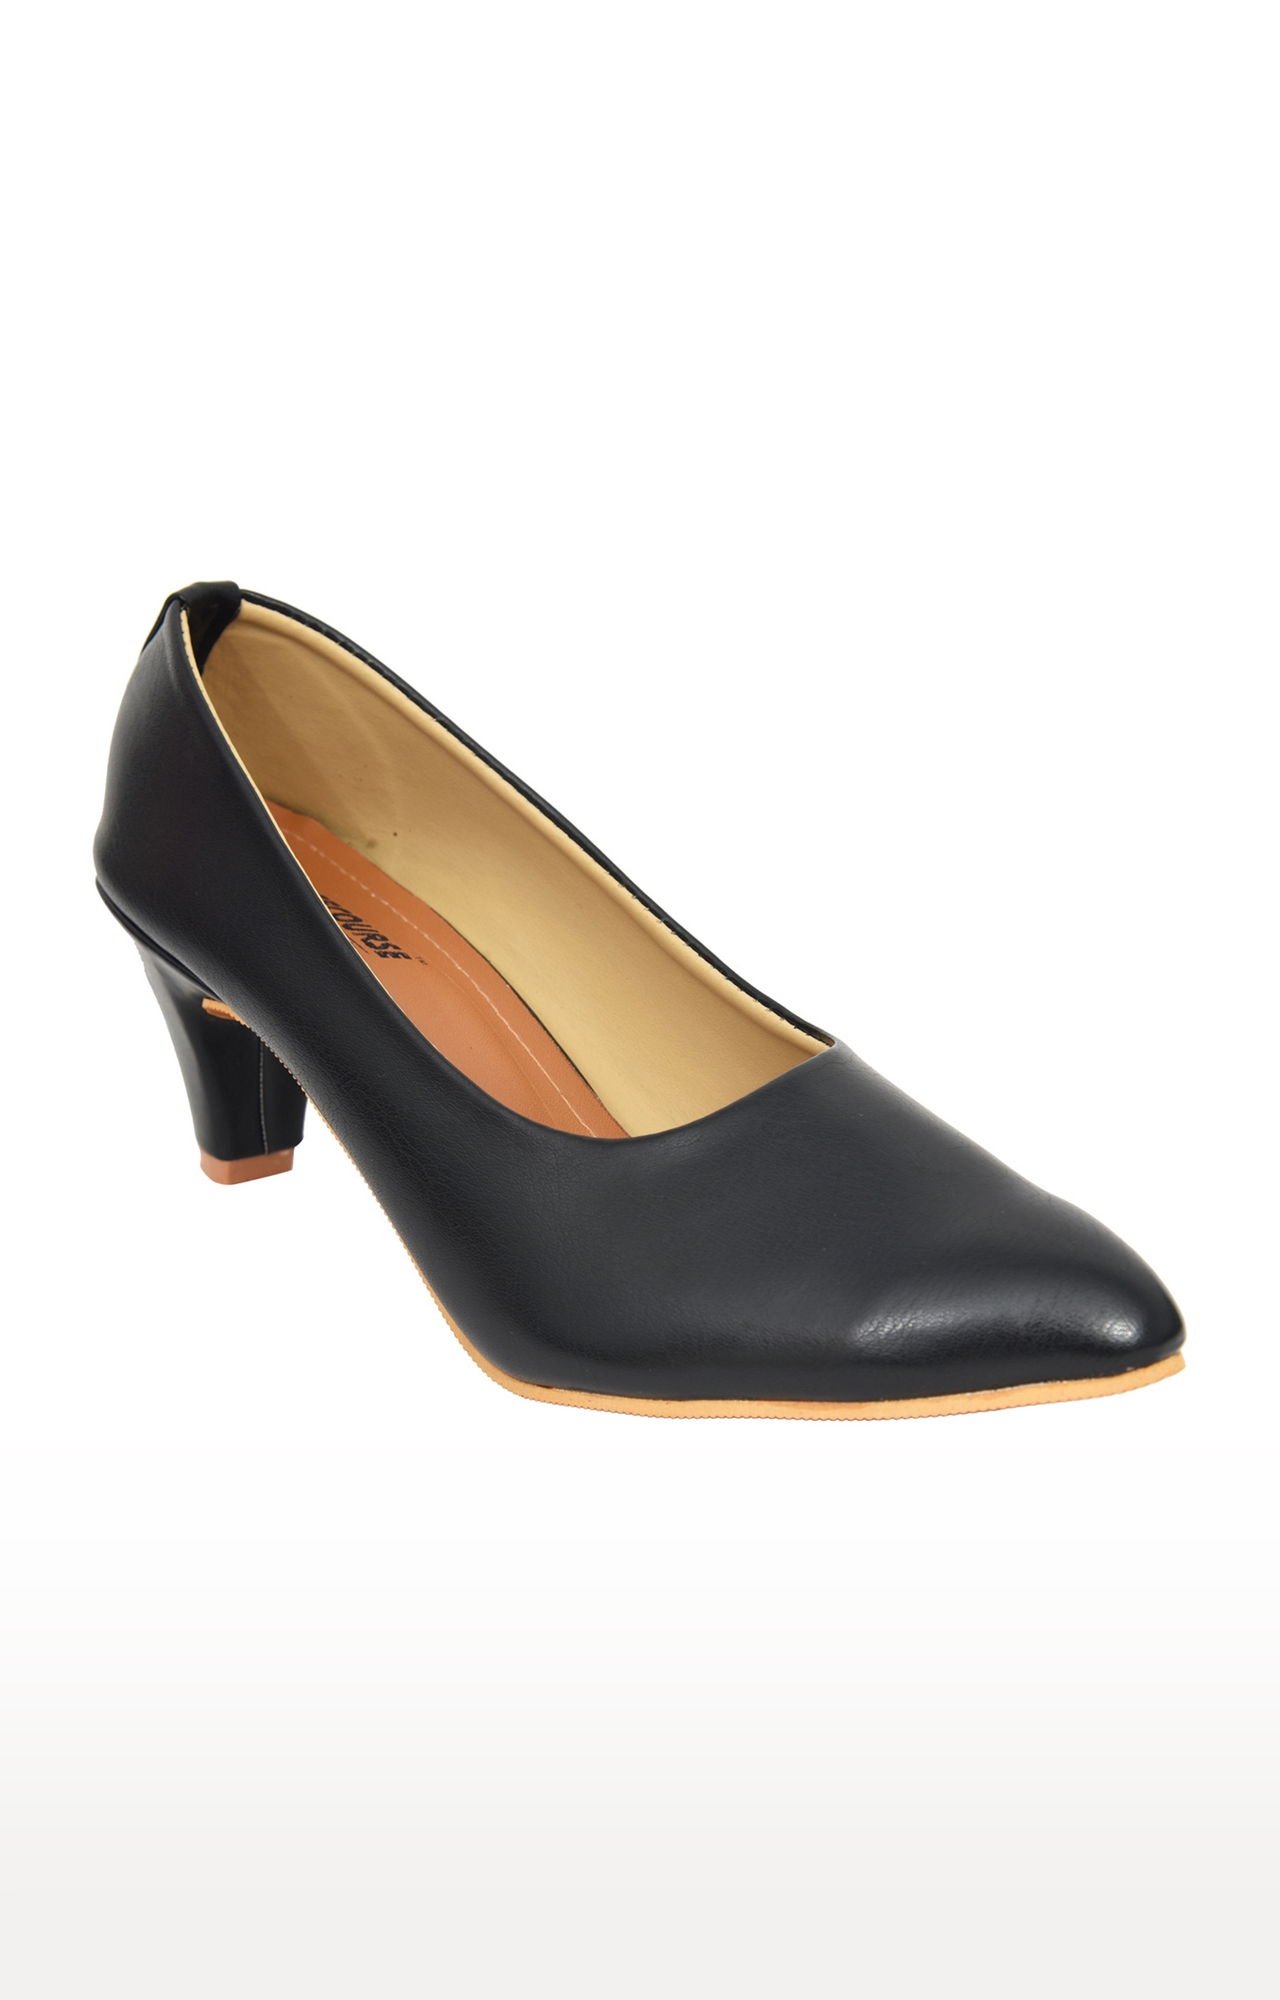 Racecourse | Racecourse Women's Cone Heel High Bottom Artificial Leather Beige Sheet Full Shoe Belly With the Heel Height of 2.5 Inch 9032 Black